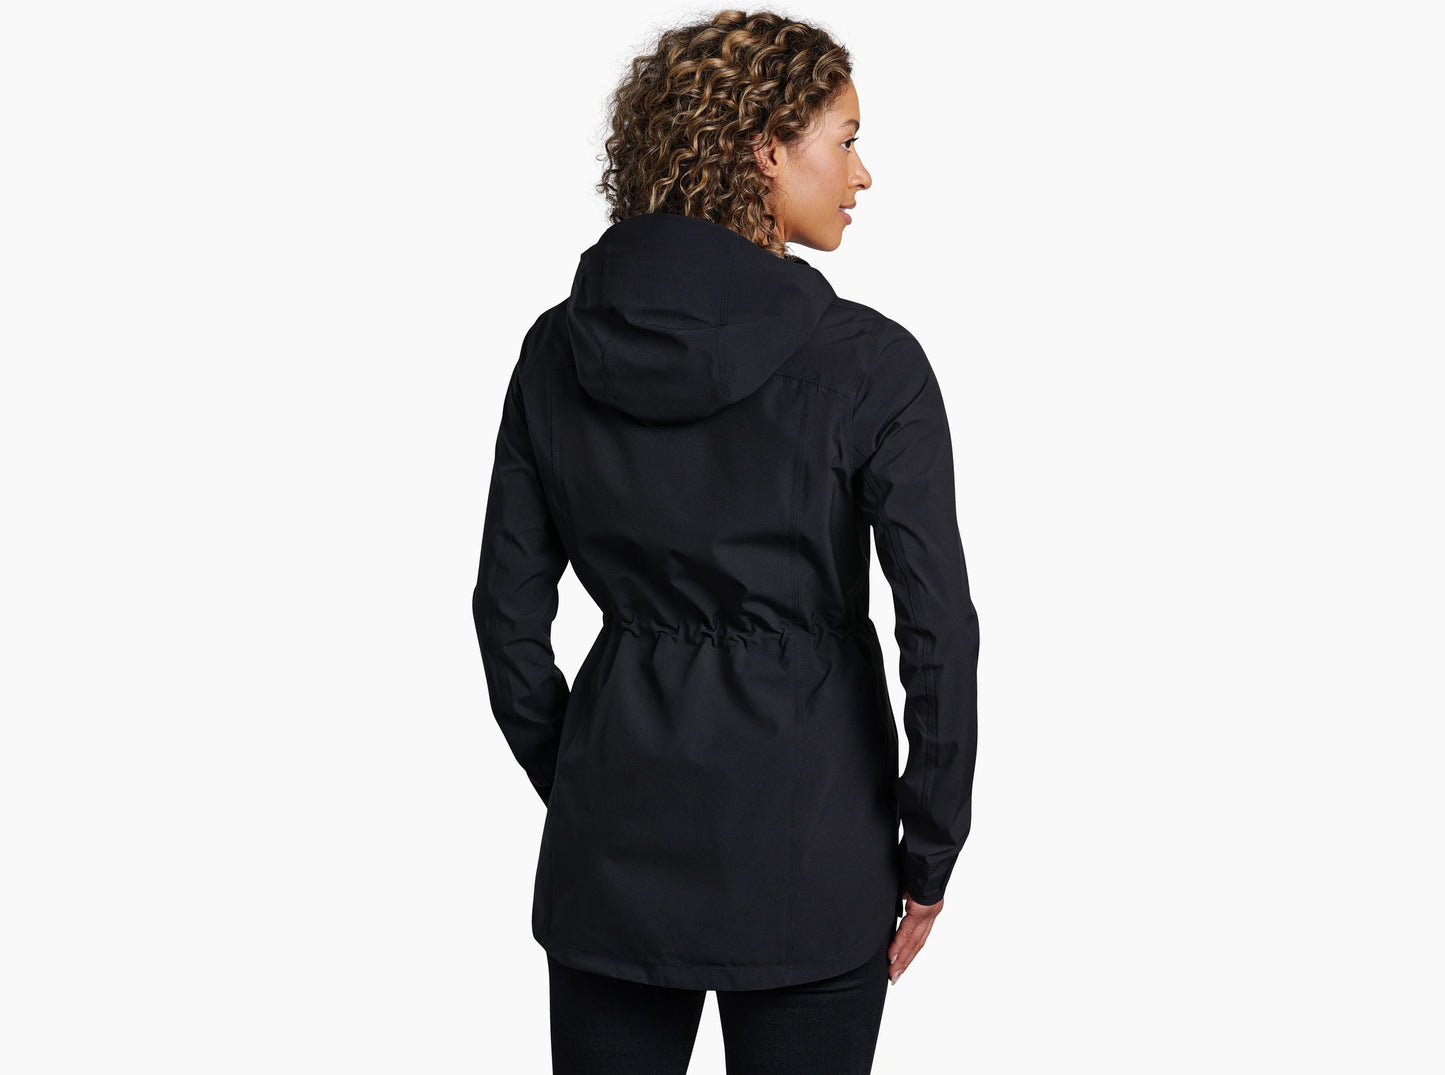 Stay Dry in Style with the Kuhl Jetstream Trench Rain Jacket